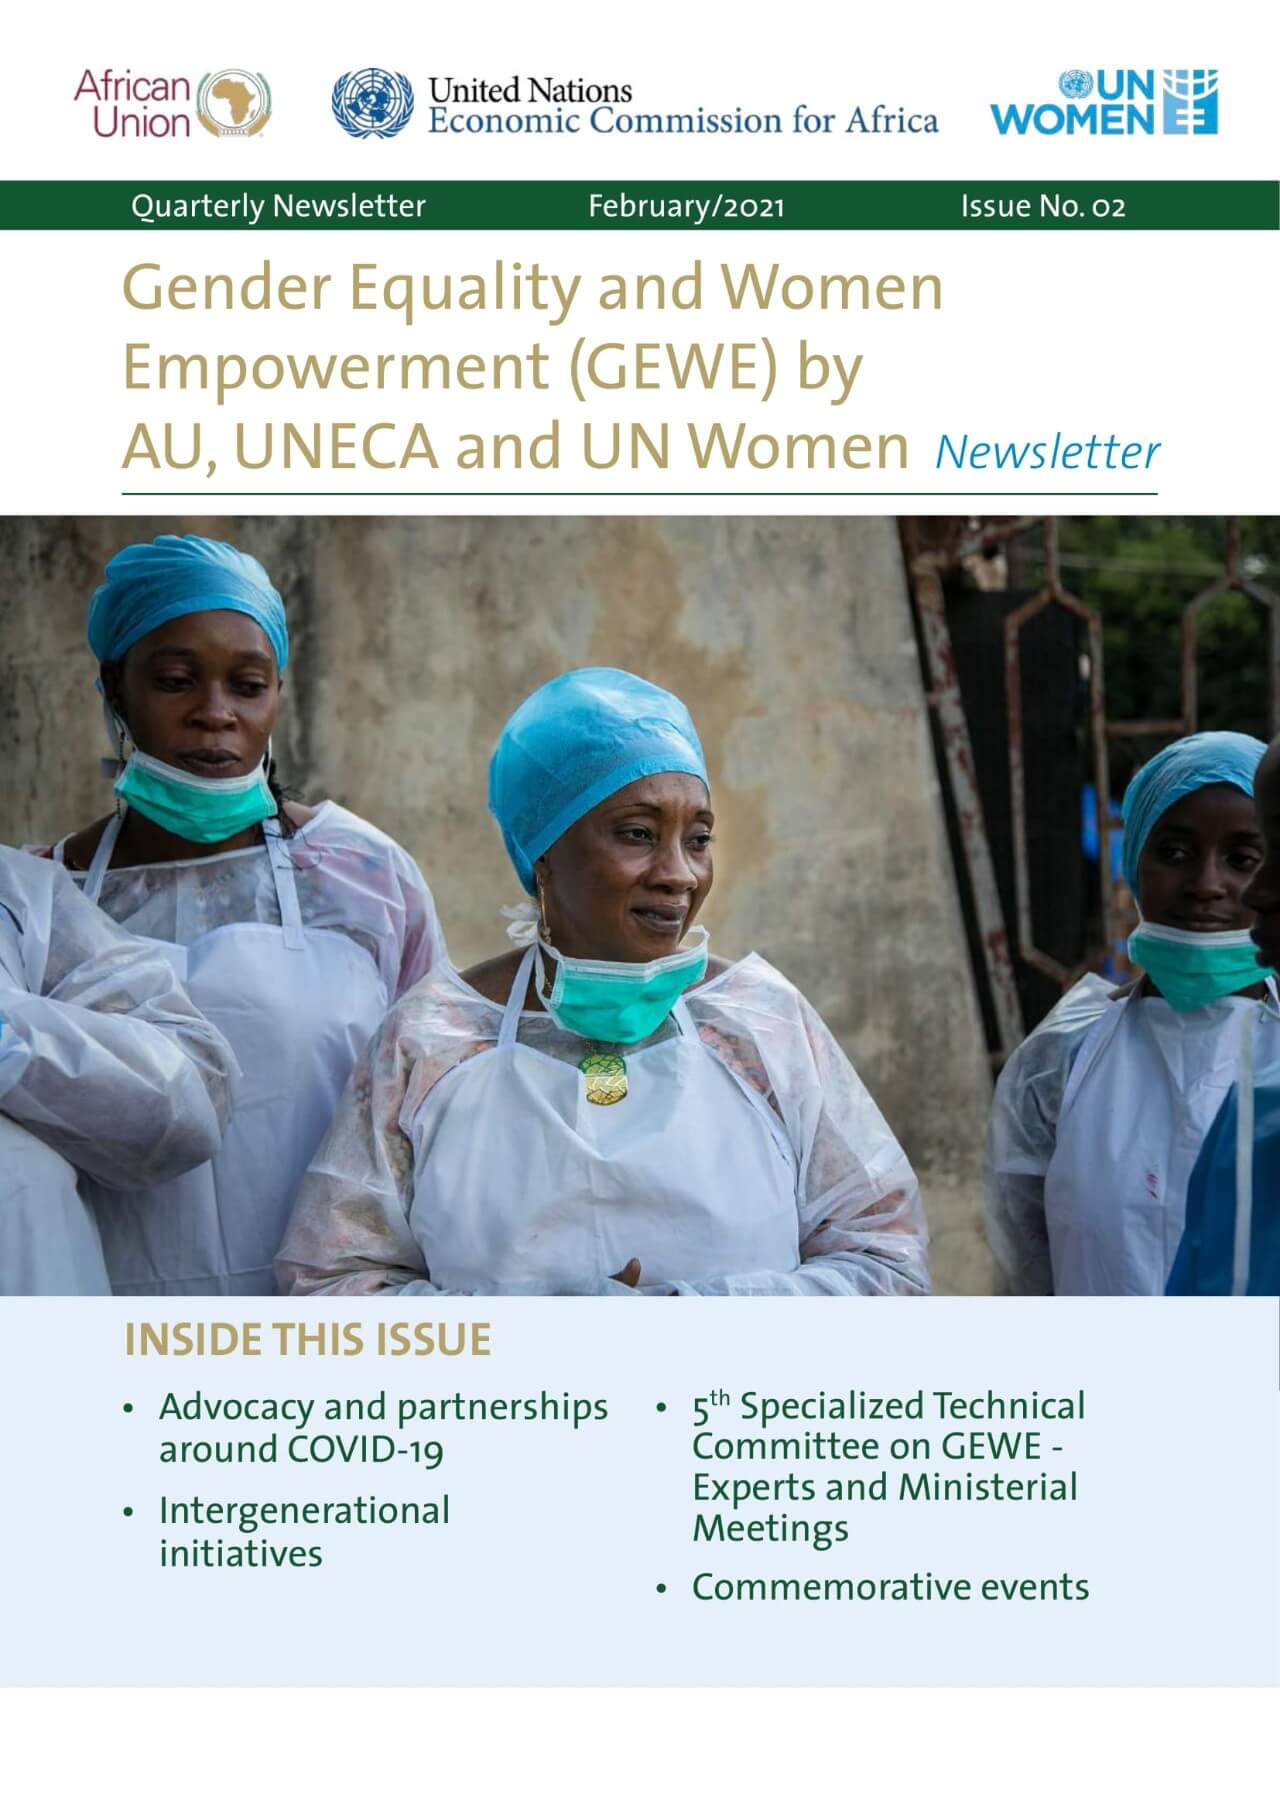 Gender Equality and Women Empowerment by AU UNECA and UN Women